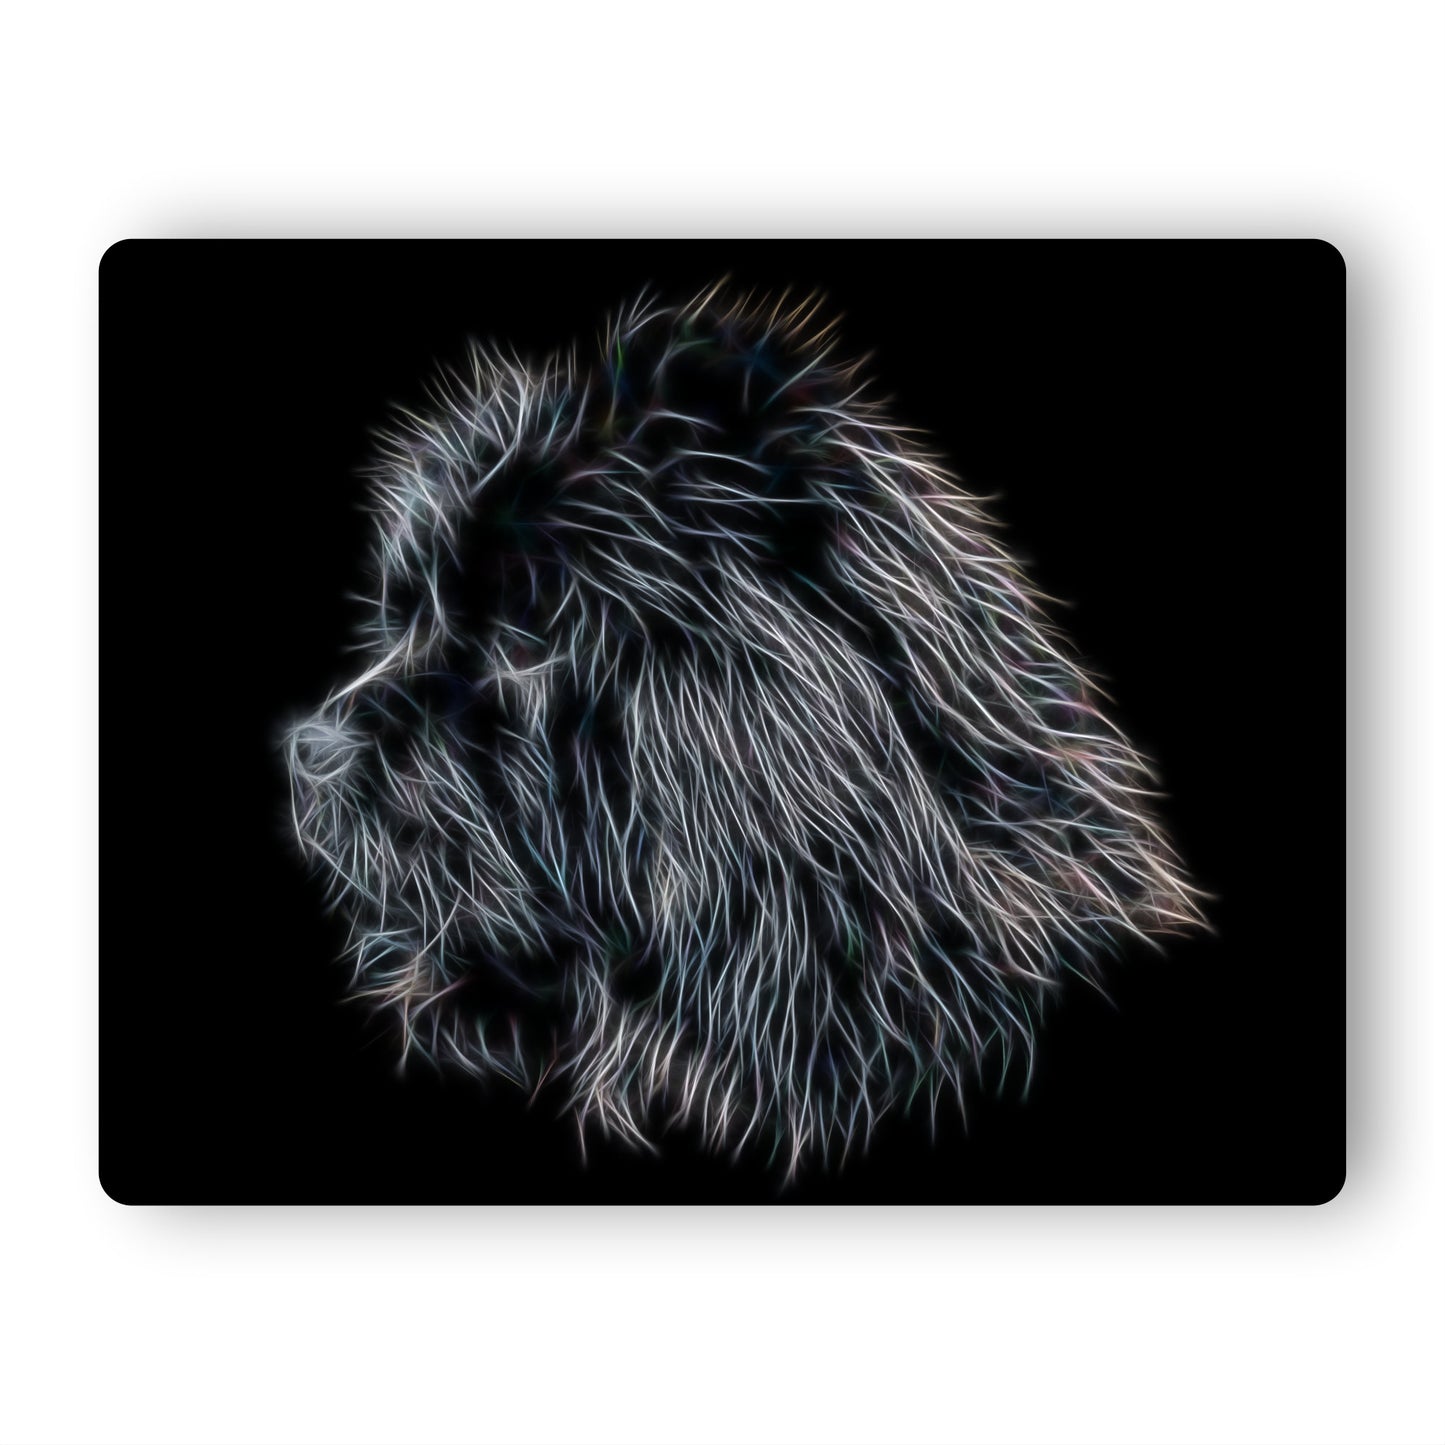 Black Chow Chow Metal Wall Plaque with Stunning Fractal Art Design,  Perfect Chow Chow Owner or Dog Lover Gift.